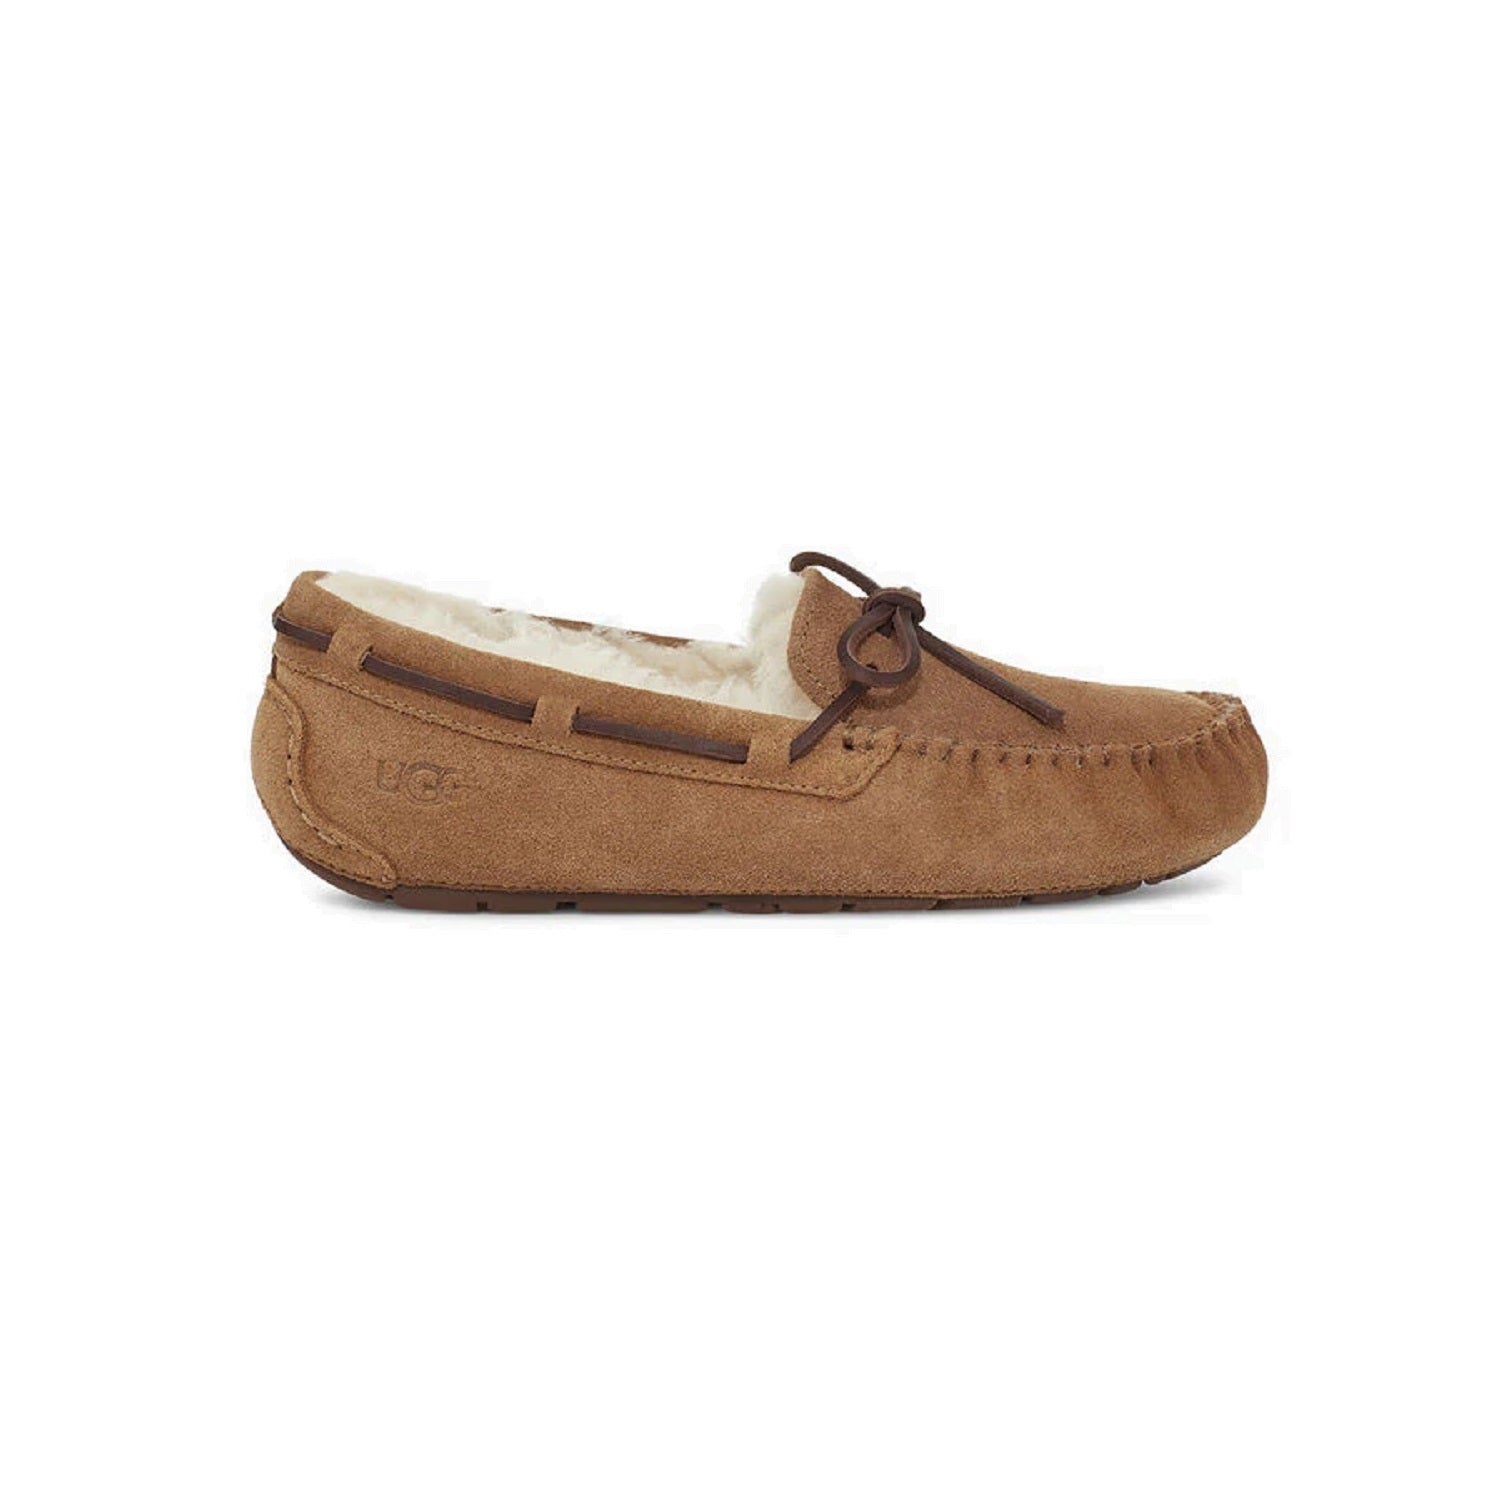 Moccasin style slipper with bow in chestnut.